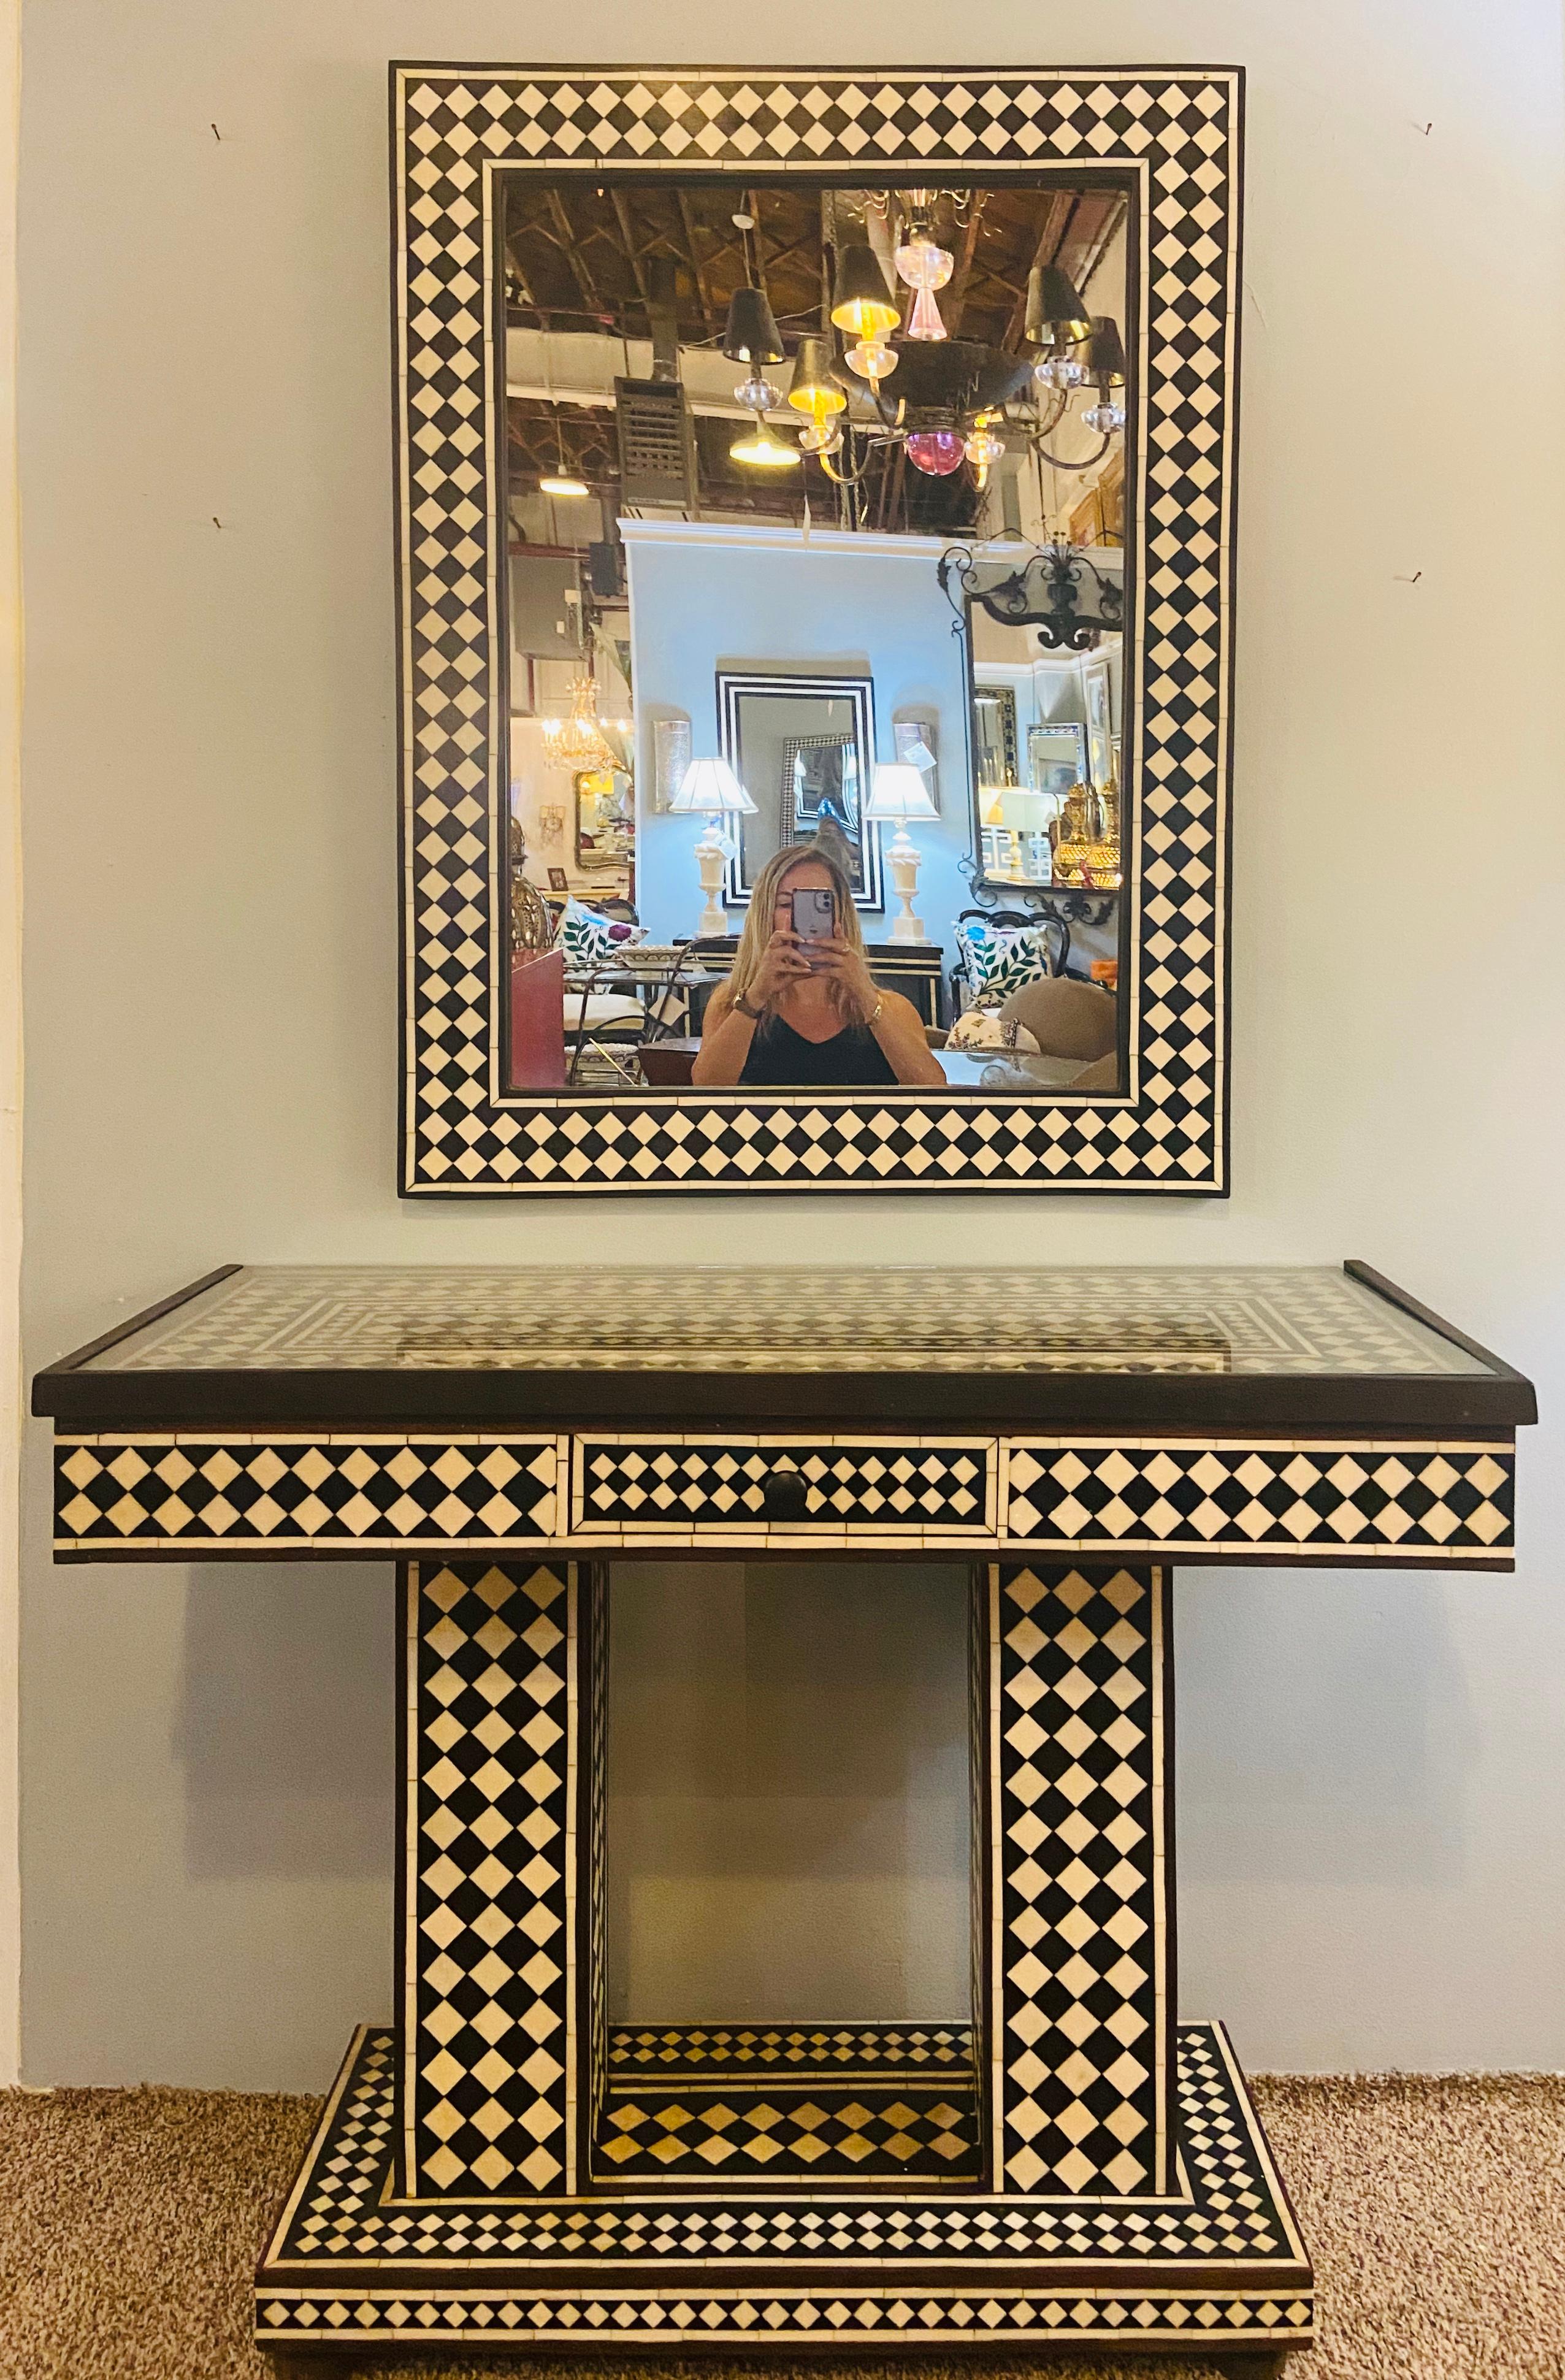 Art Deco style black and white console table and mirror in diamond pattern
A beautiful Art Deco style black and white console table and matching mirror. The pair is made of resin and shows wood inlay in brown. The retro modern geometric midcentury